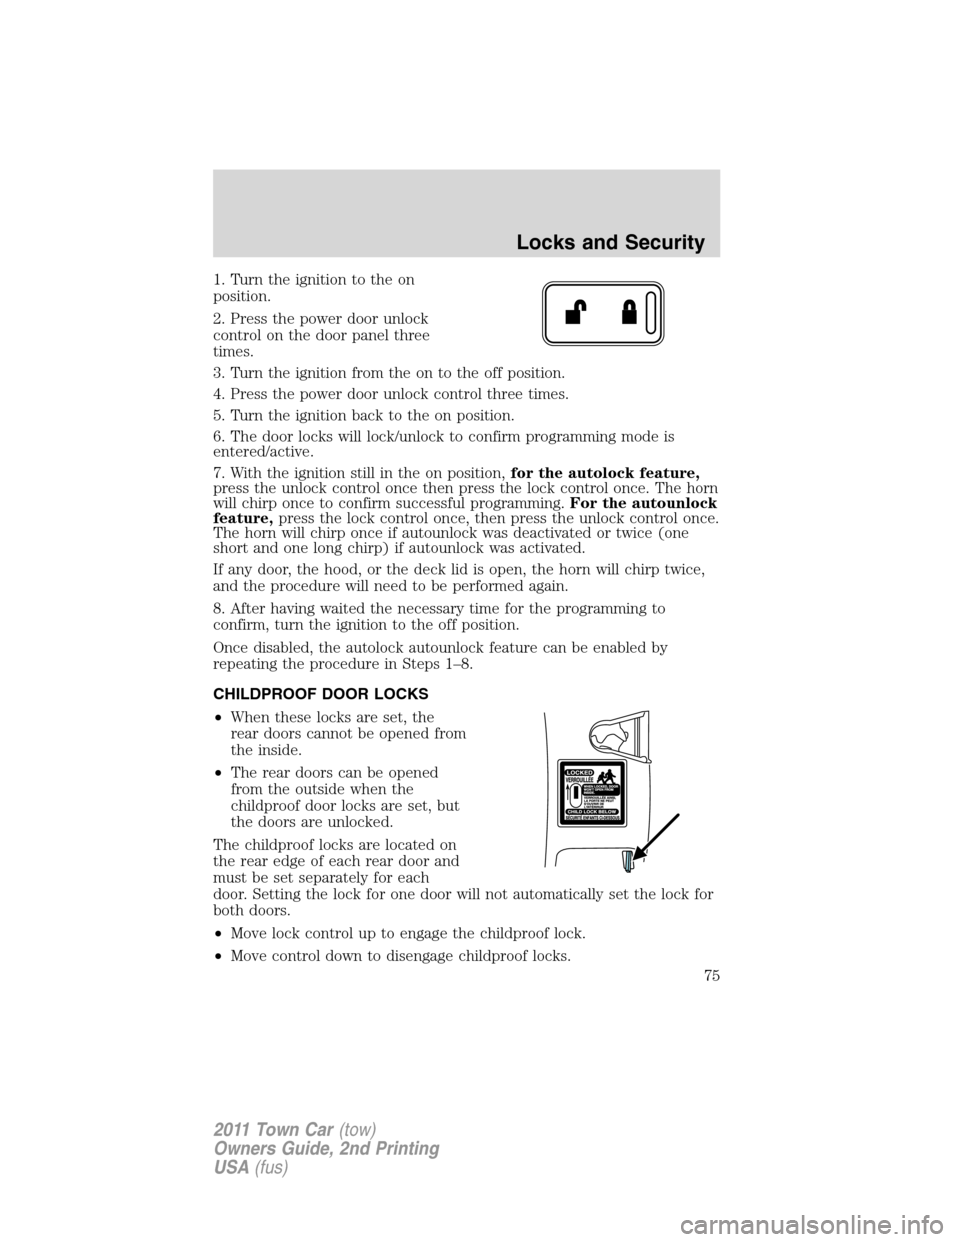 LINCOLN TOWN CAR 2011  Owners Manual 1. Turn the ignition to the on
position.
2. Press the power door unlock
control on the door panel three
times.
3. Turn the ignition from the on to the off position.
4. Press the power door unlock cont